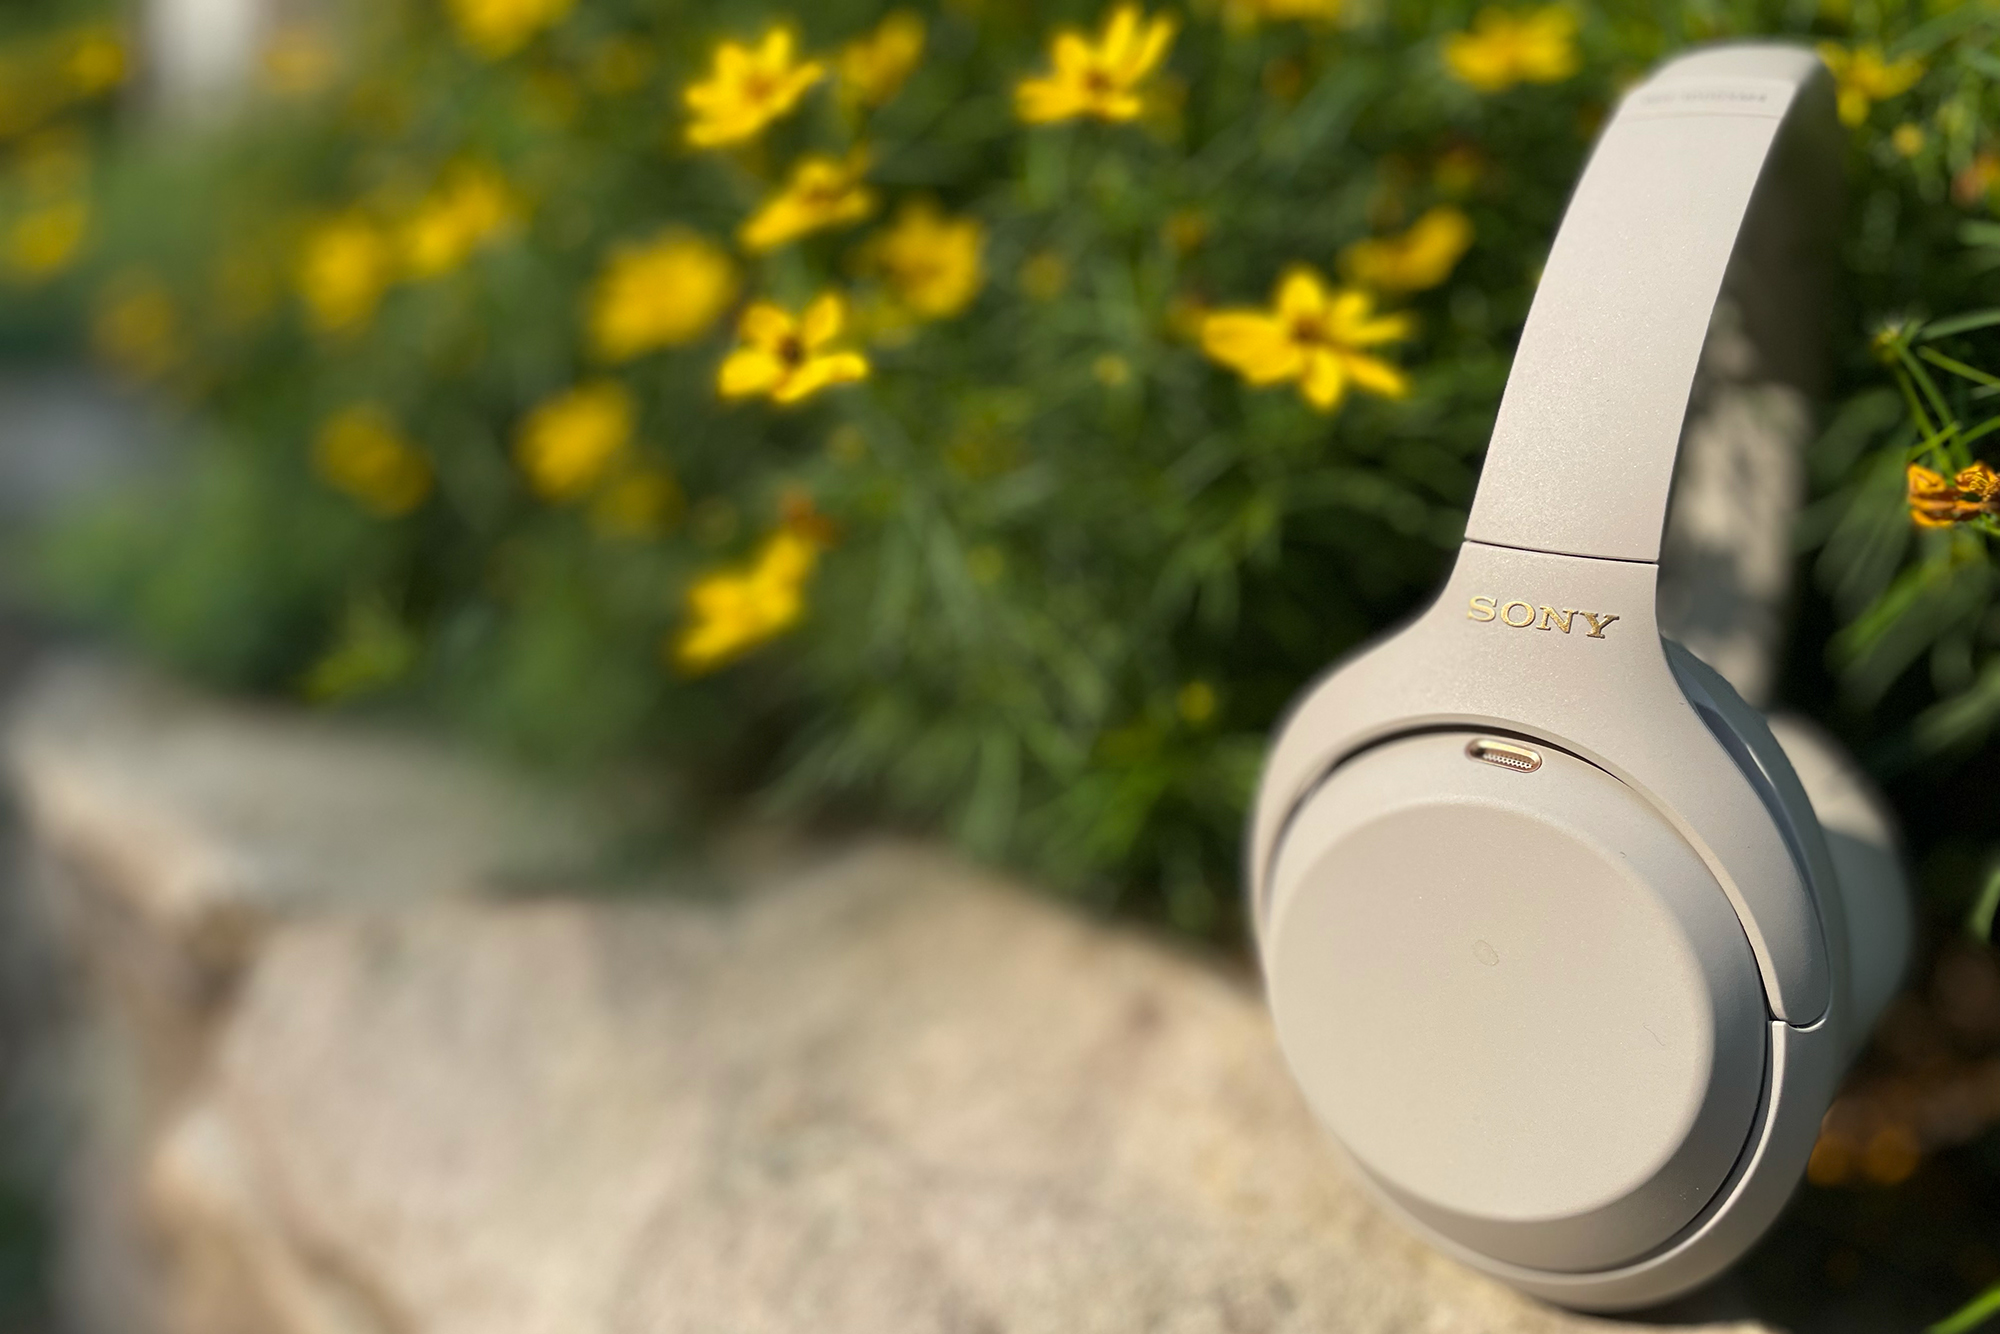 Sony WH-1000XM4 Noise-Canceling Headphones Review - Reviewed